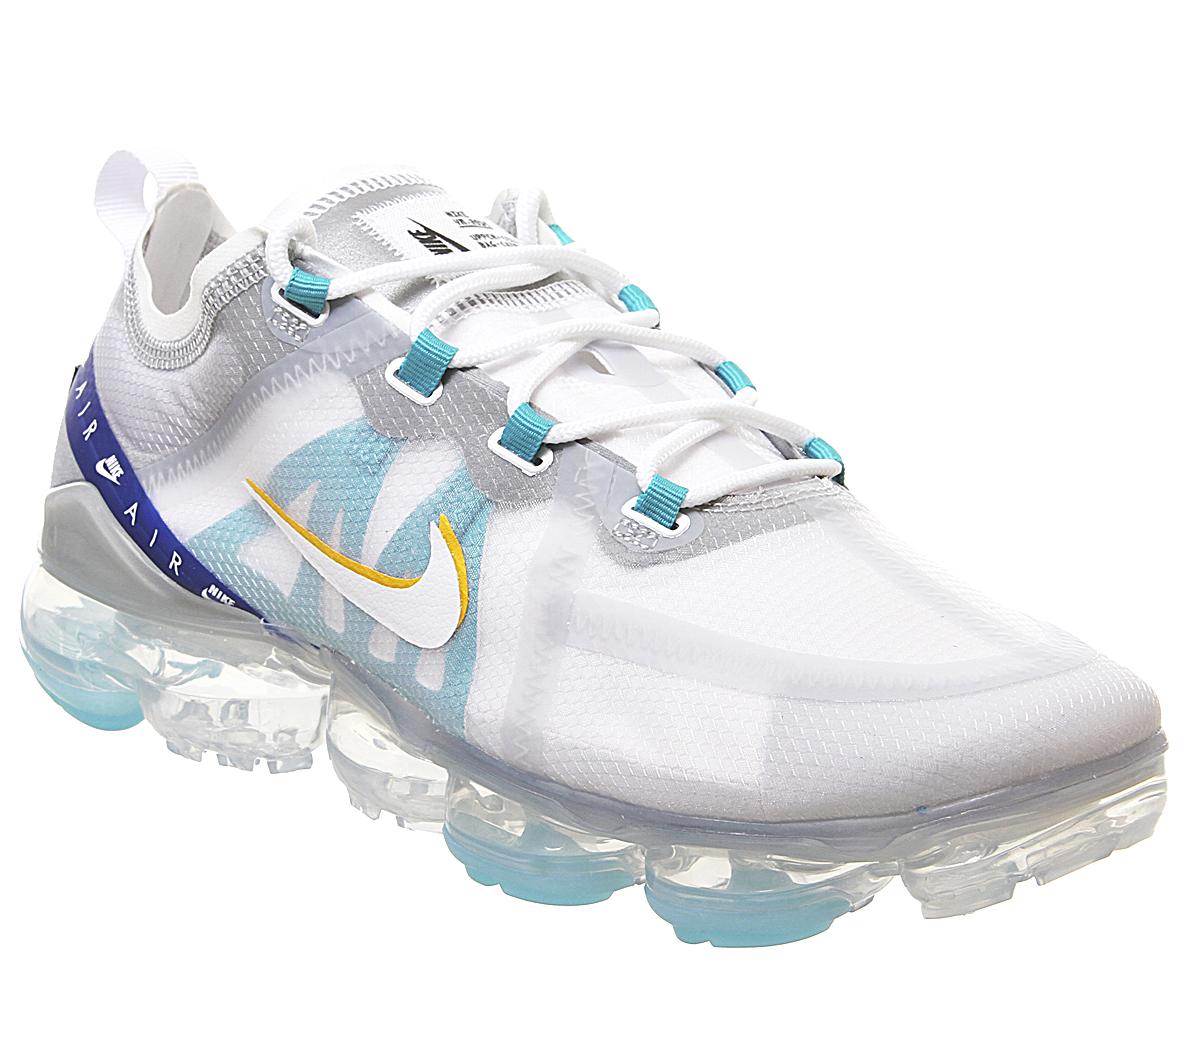 nike running vapormax 19 trainers in white and gold